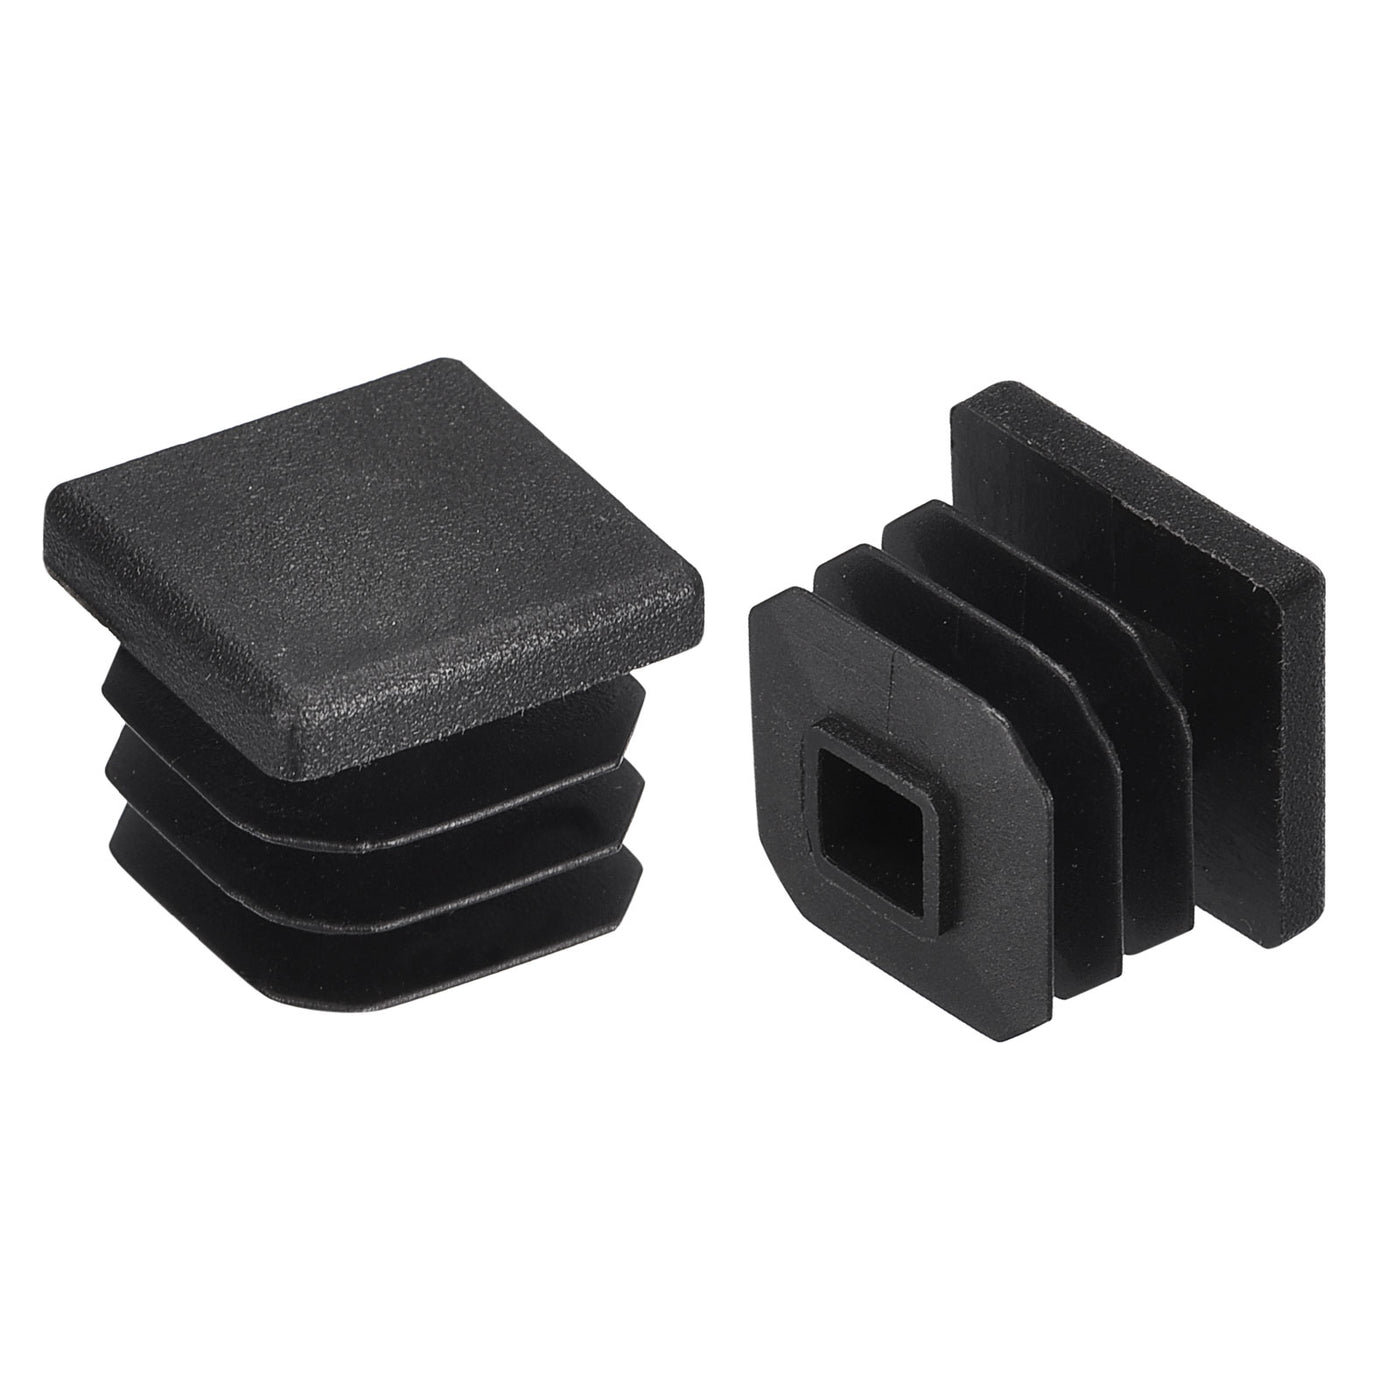 uxcell Uxcell 4Pcs 16mmx16mm(0.63inch) Plastic Tubing Plug Square Post End Caps Black